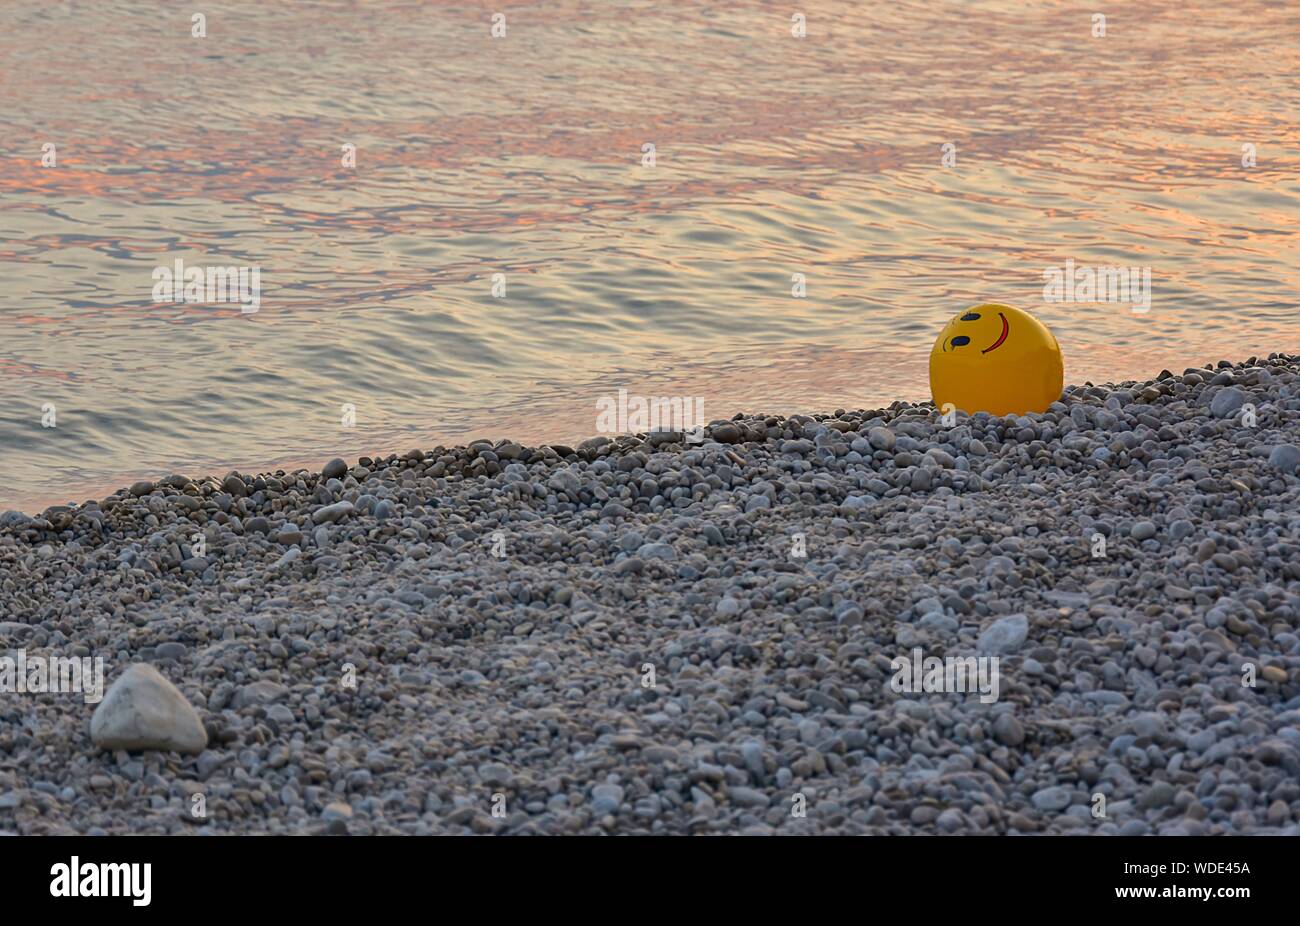 A yellow ball on a pebble beach at sunset. Ball with smiley face. Stock Photo